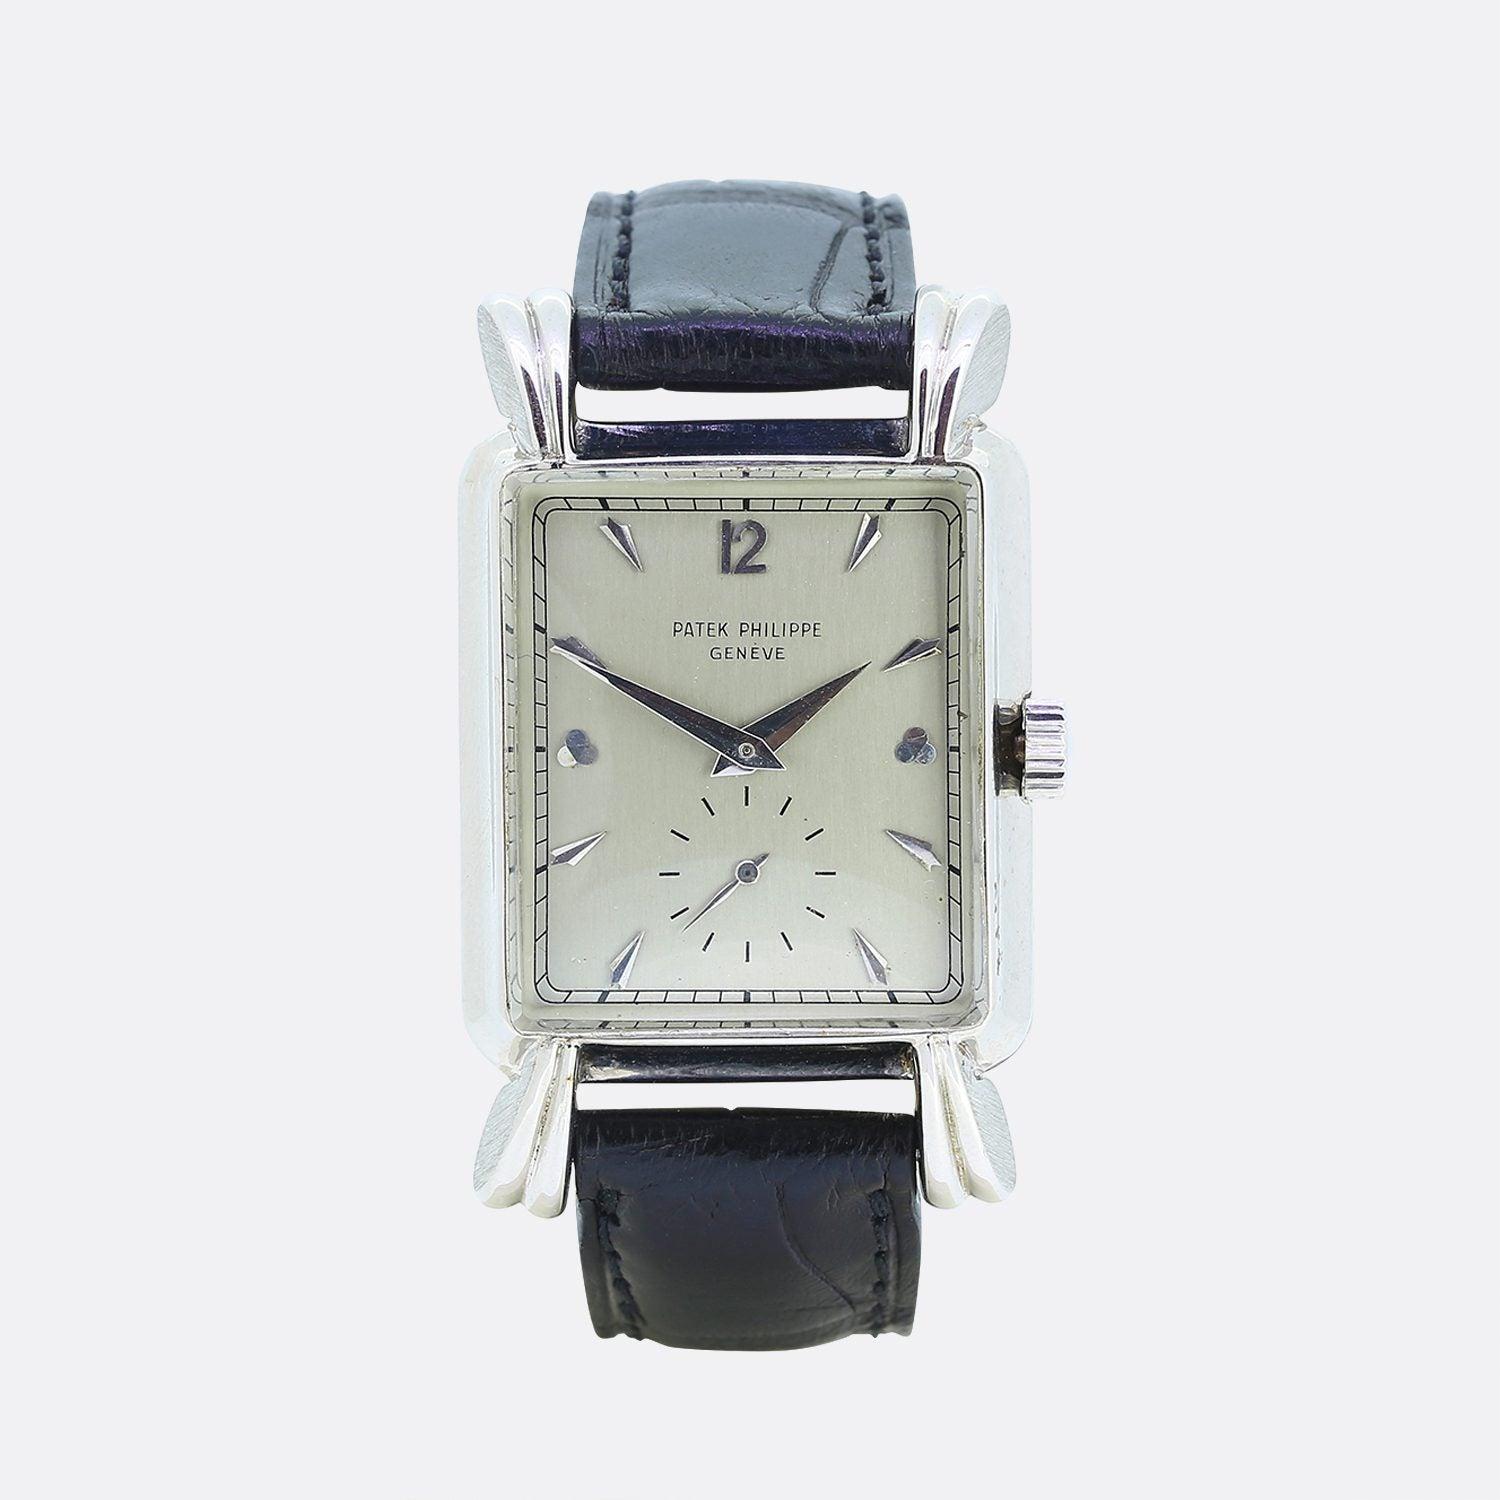 This is a wonderful 1950s gents Patek Philippe wristwatch. The watch features a silver dial with white hour and minute hands and a seconds subdial at 6 o'clock. The fluted overhanging tear drop lugs on the large vertical rectangular case with